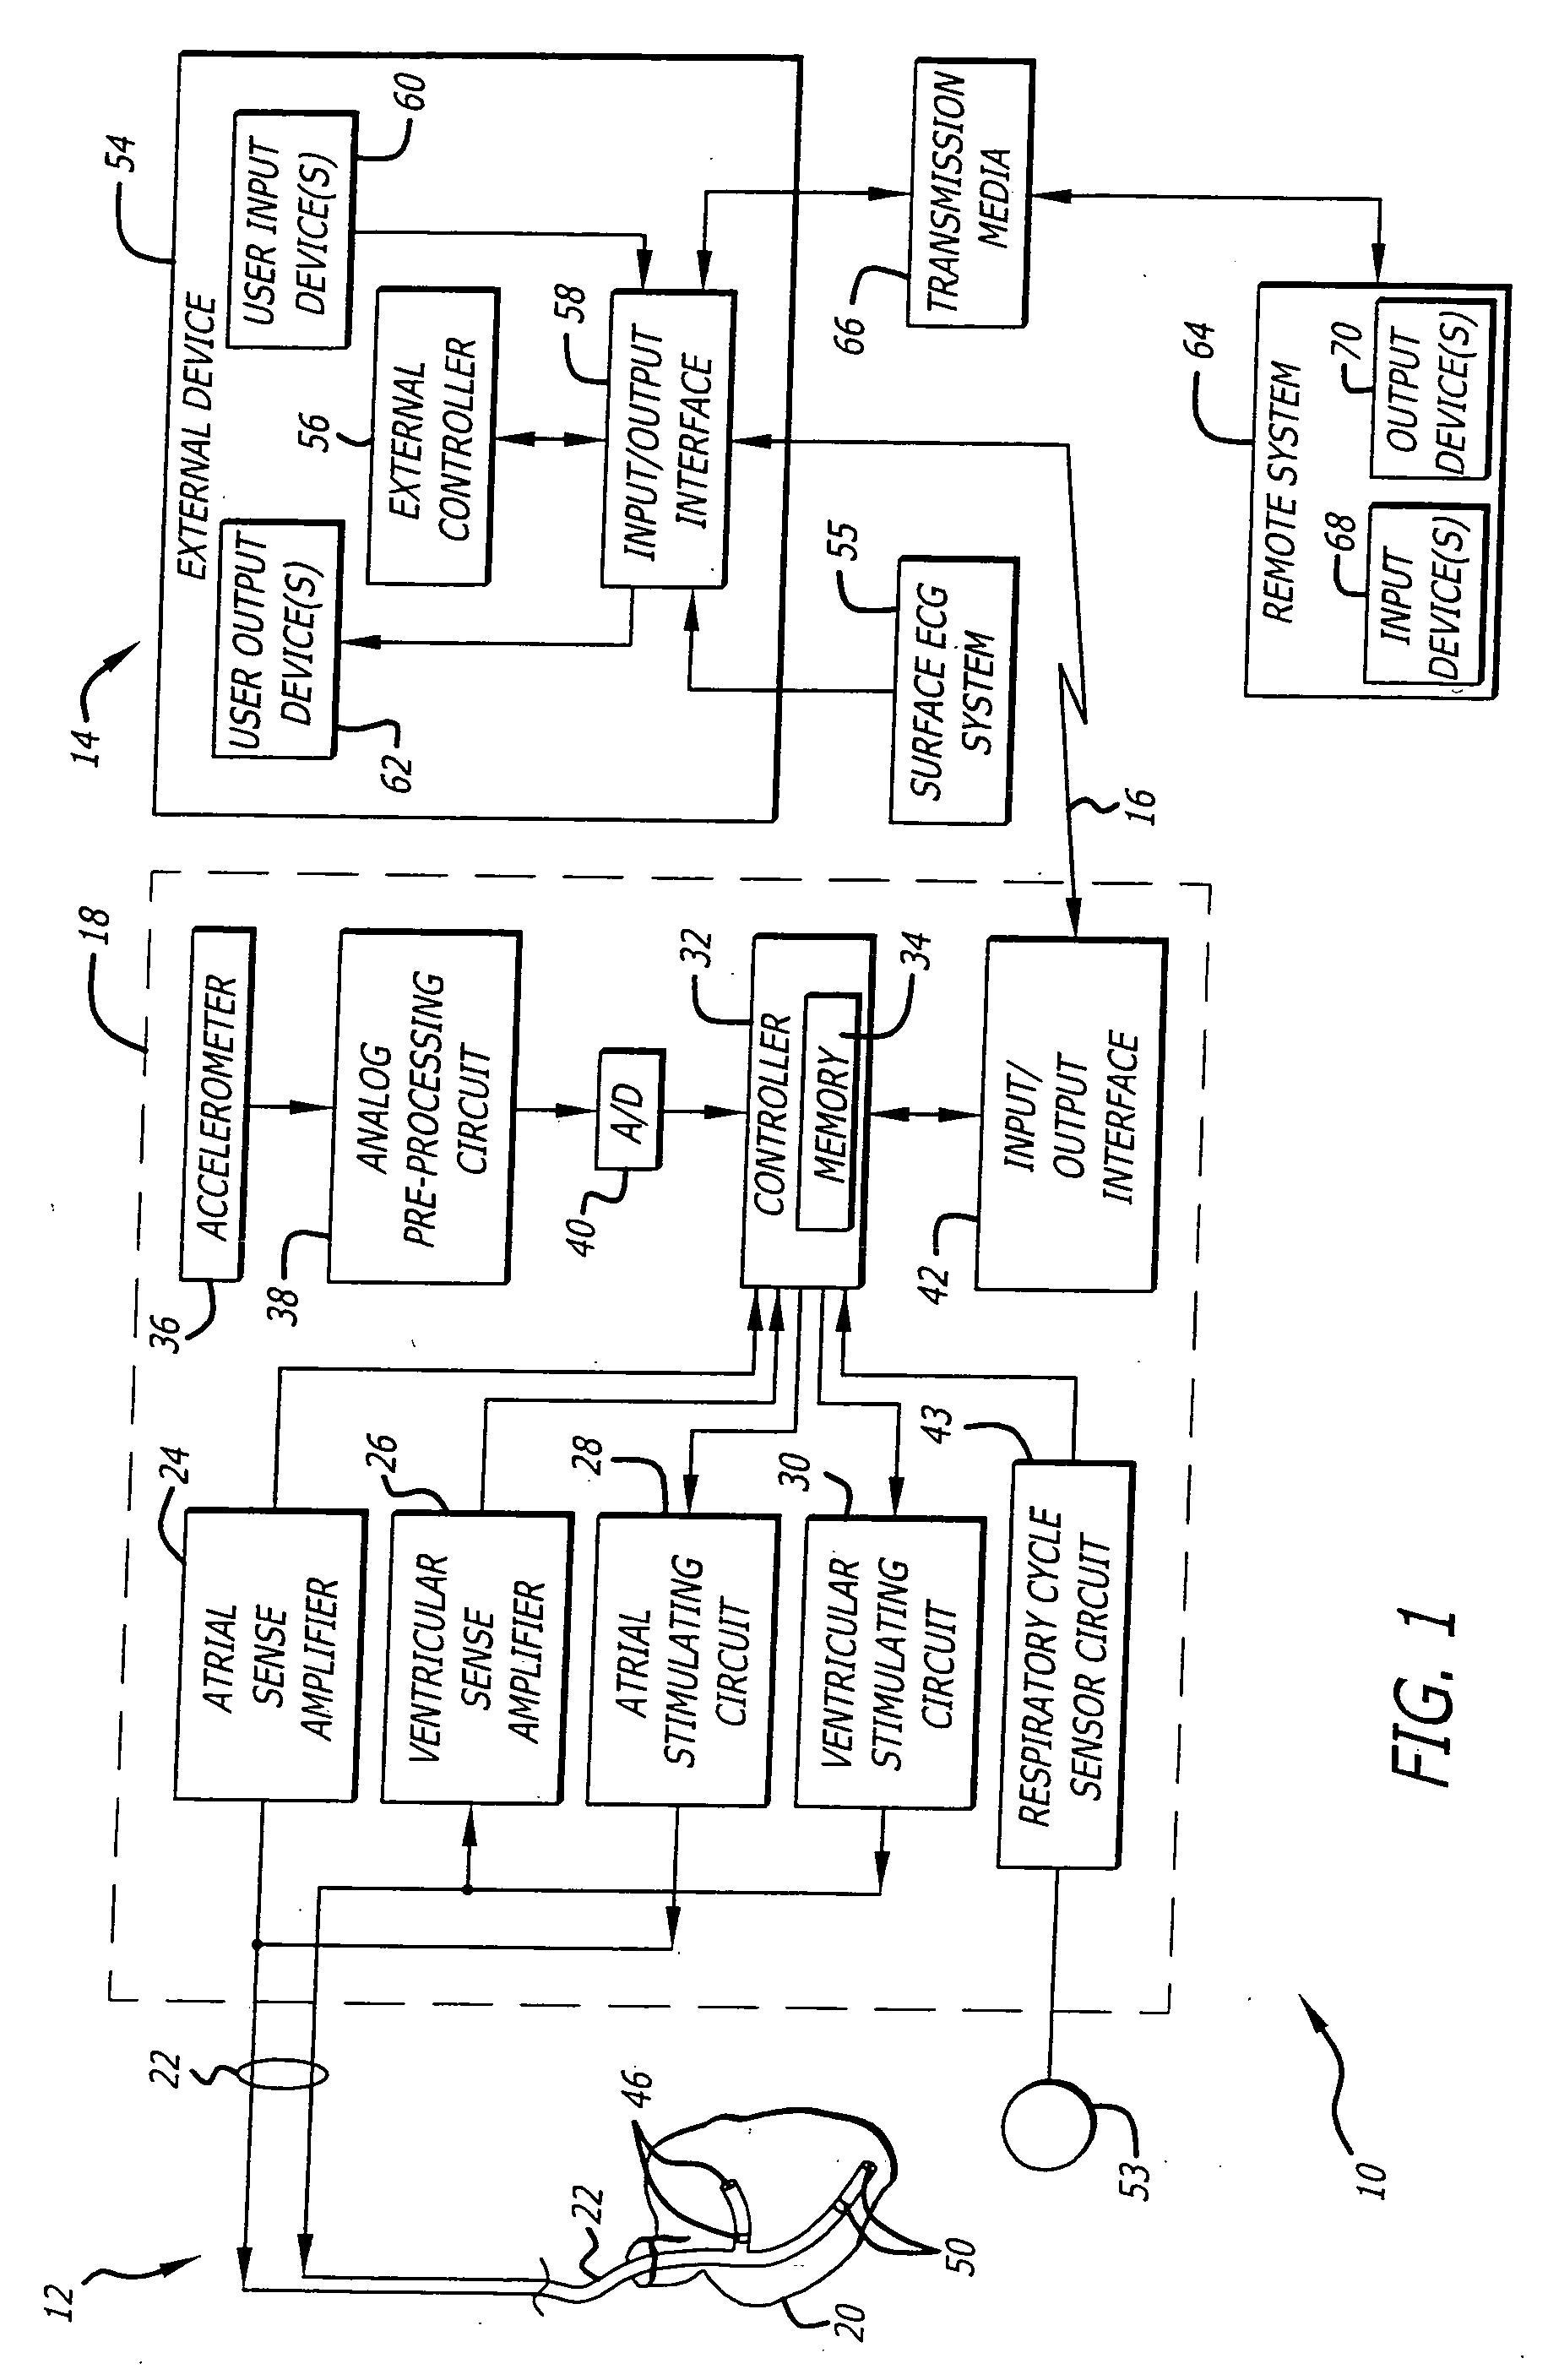 Apparatus and method for detecting lung sounds using an implanted device